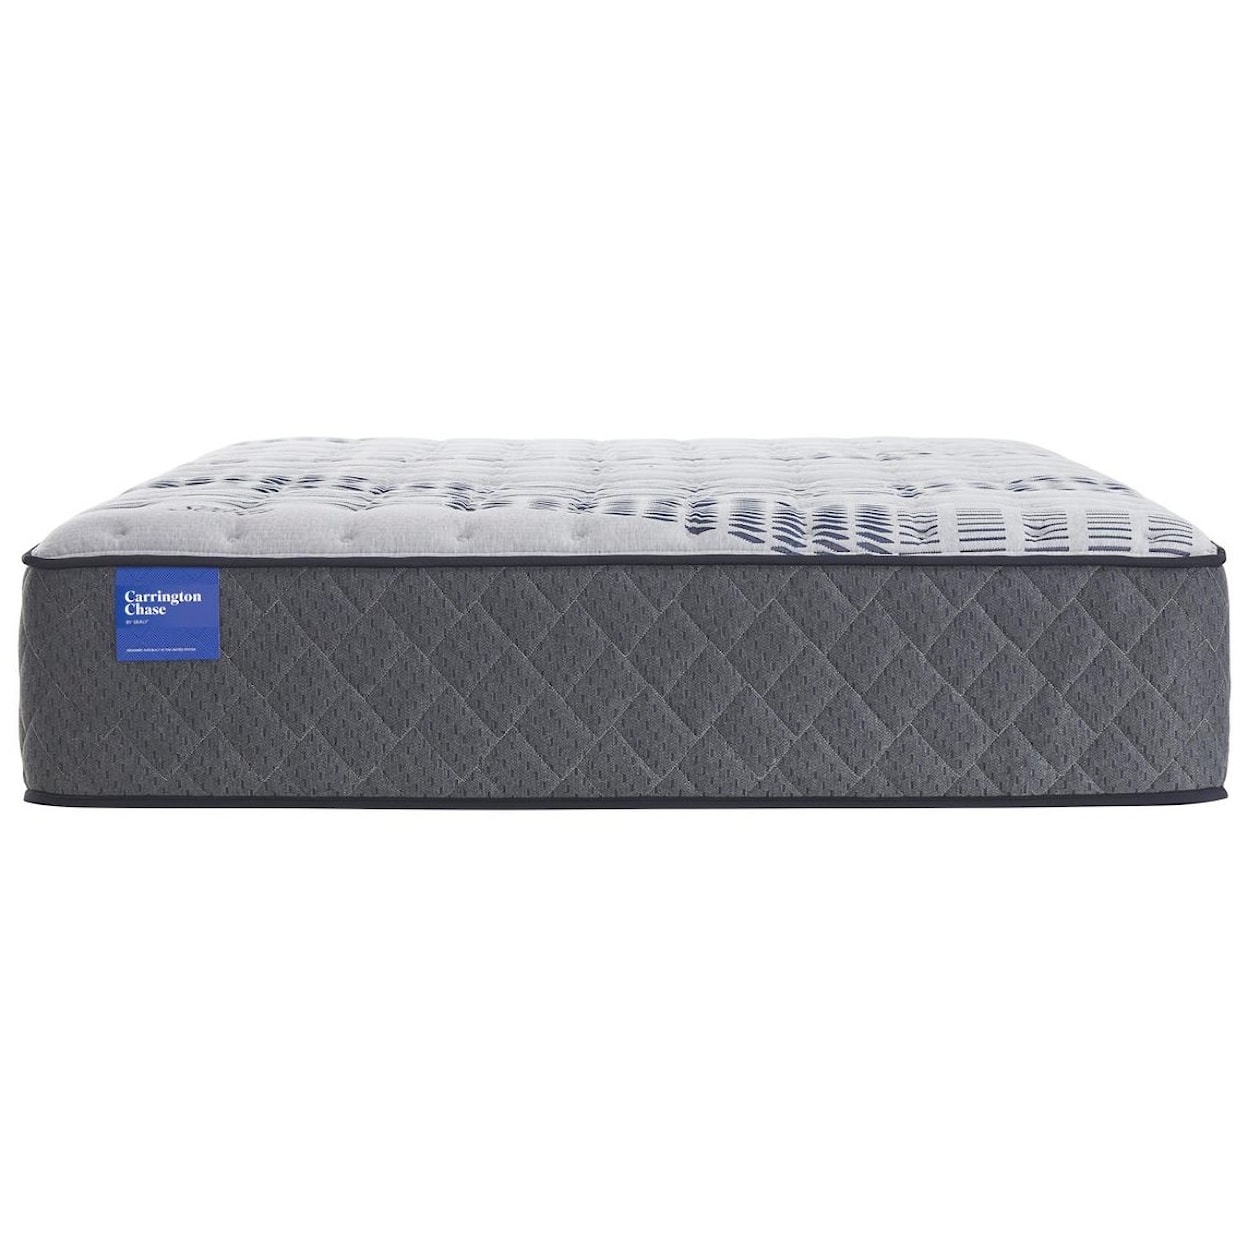 Sealy Sealy Posturepedic Stoneleigh Cushion Firm Full Sealy 14.5" Cushion Firm Mattress